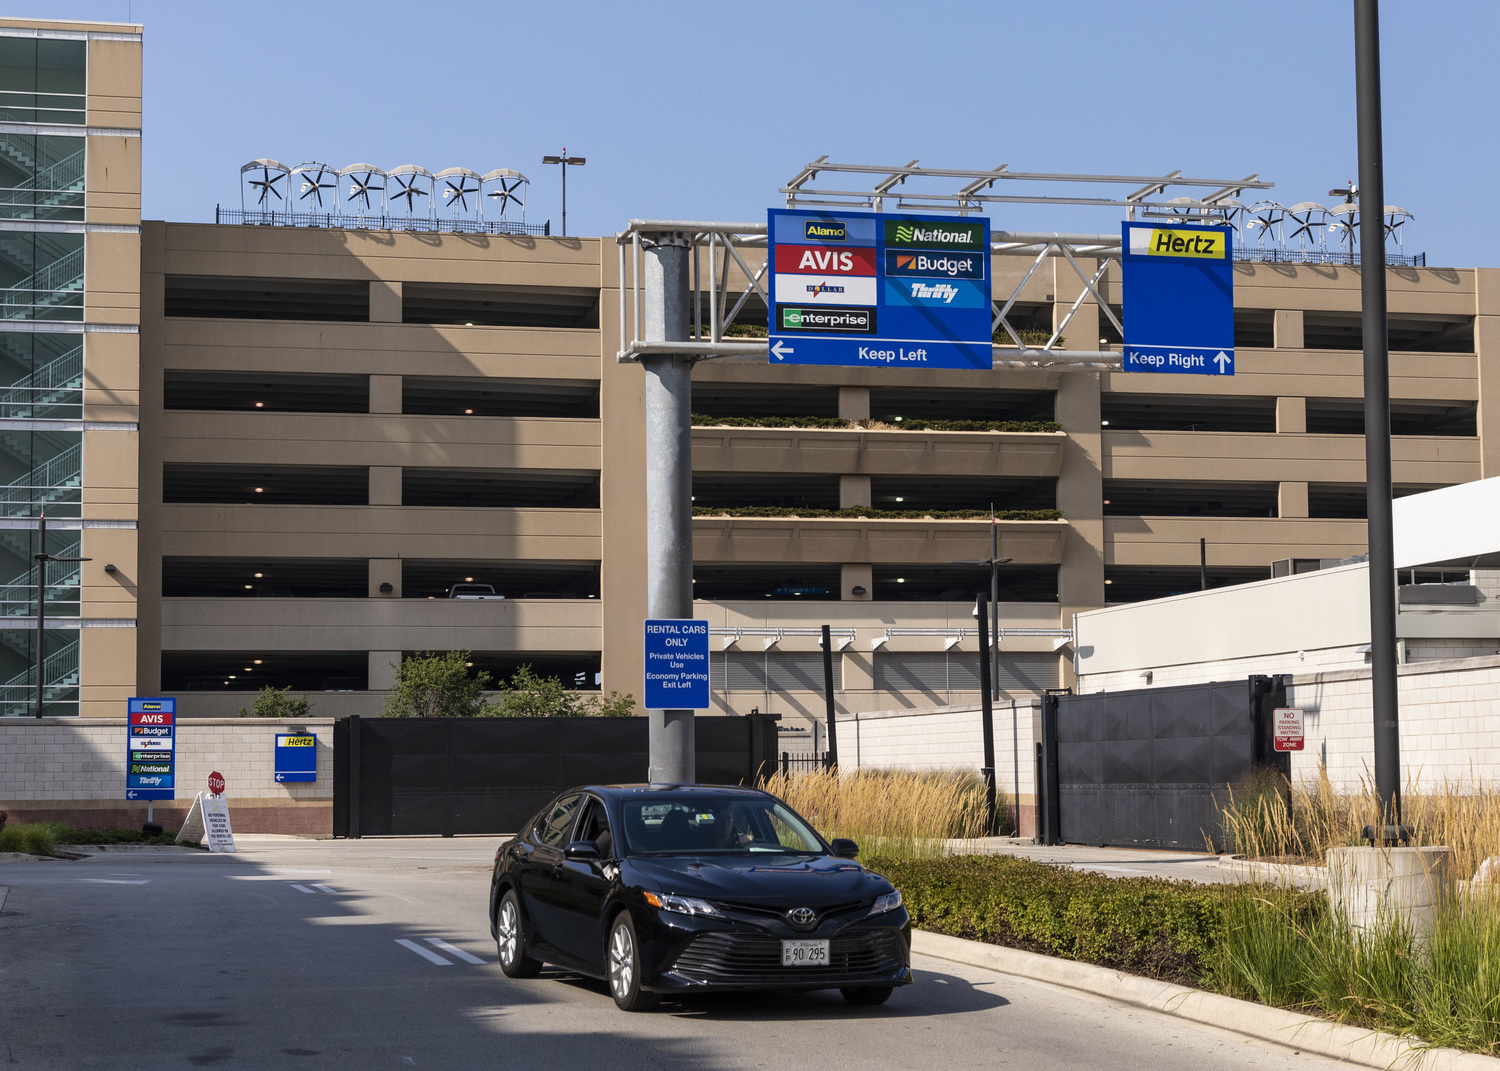 The Midway Airport rental car facility, 5150 W. 55th St.